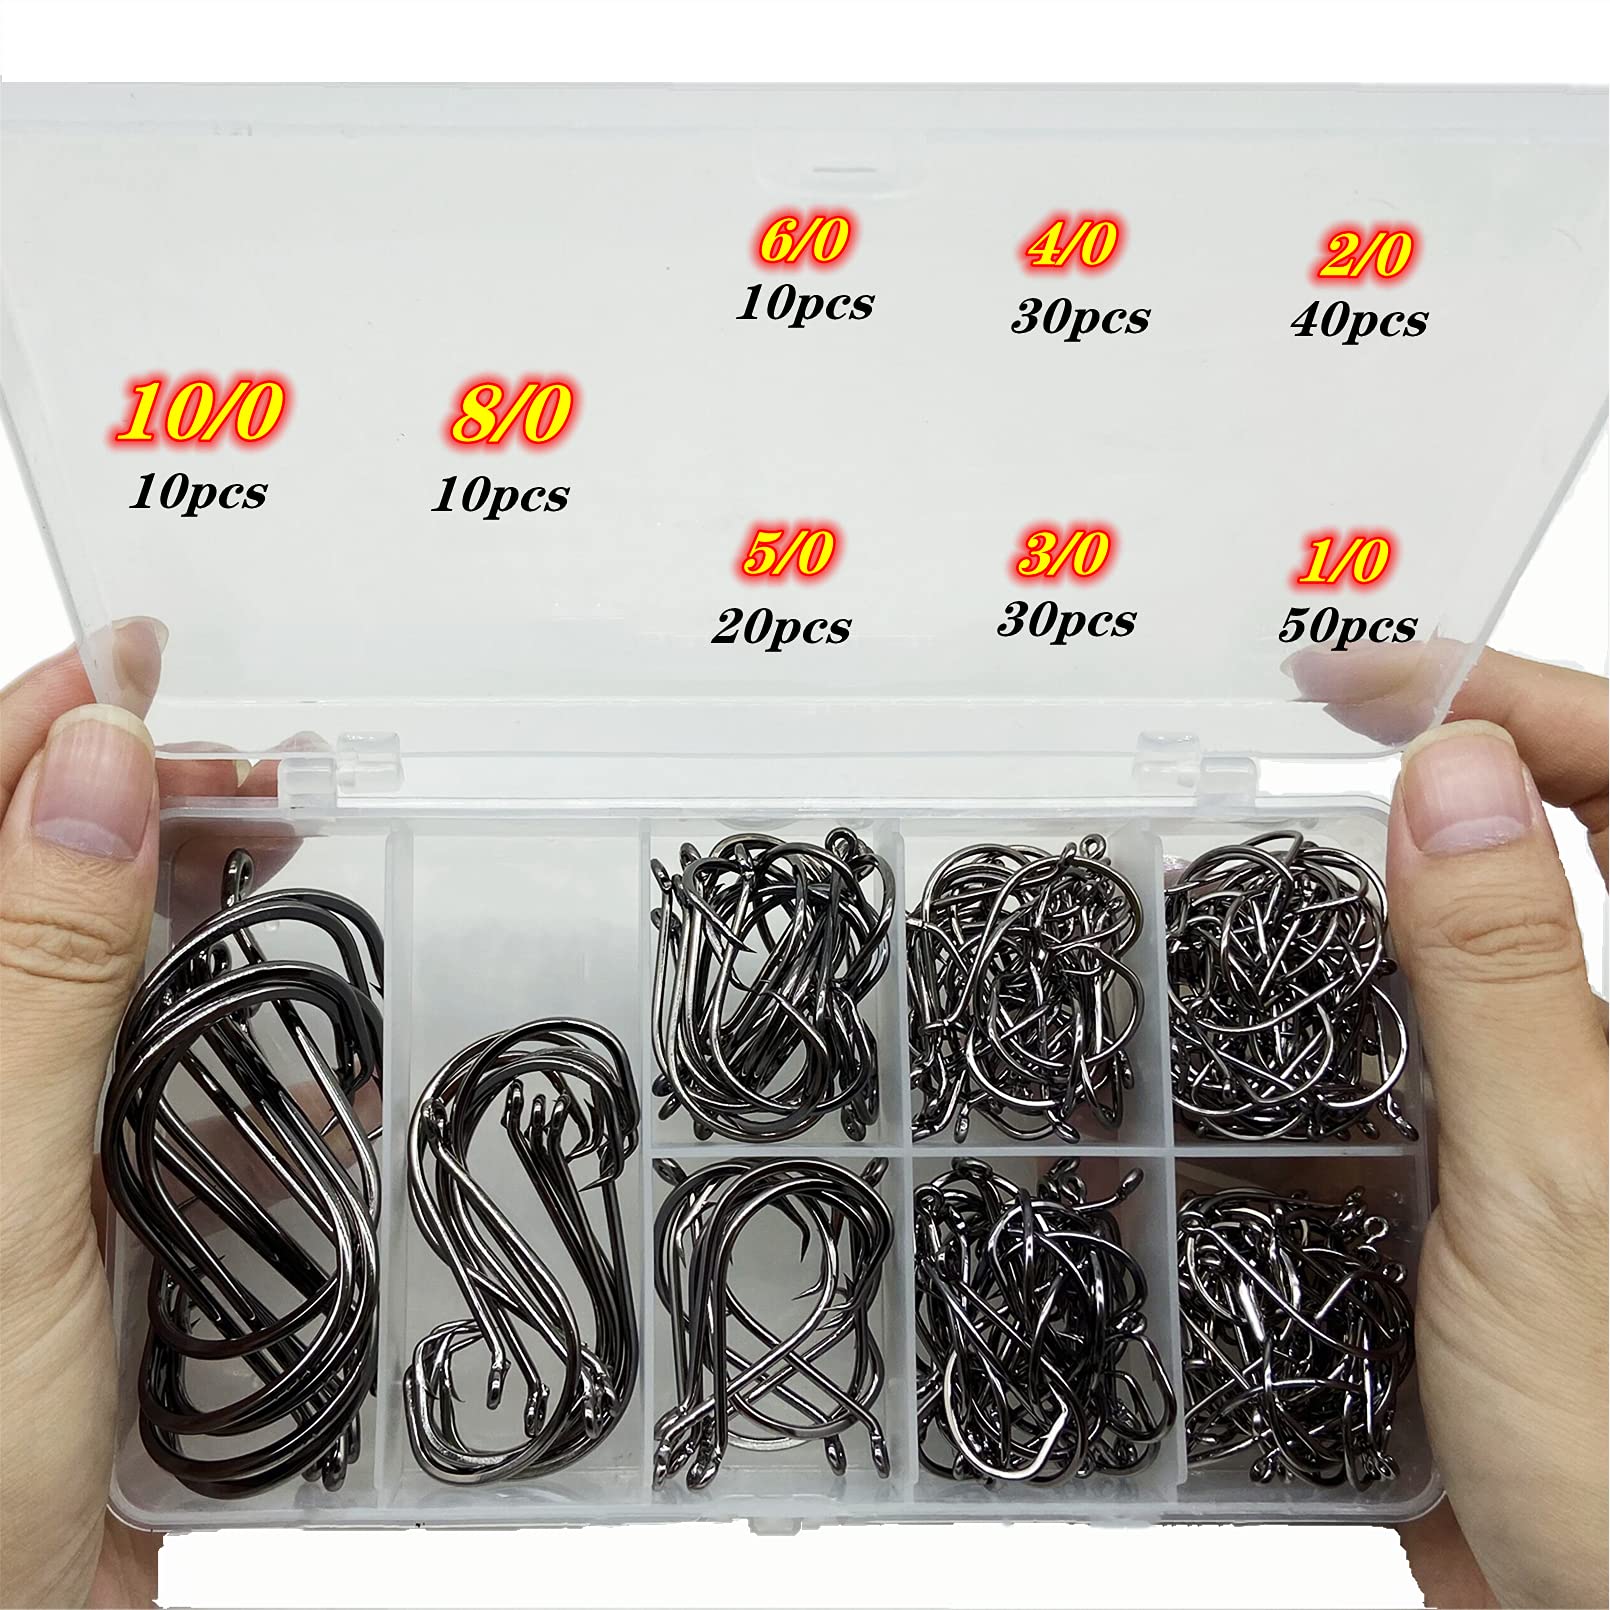 DAMIDEL 200Pcs/Box(Size:10/0 to1/0 Strong Octopus Fishing Hooks  Forged Steel/Barded Design Off-Set Point/Closed Eye Strong/Sturdy 10/0 8/0  6/0 5/0 4/0 3/0 2/0 1/0 Mixed Packaging